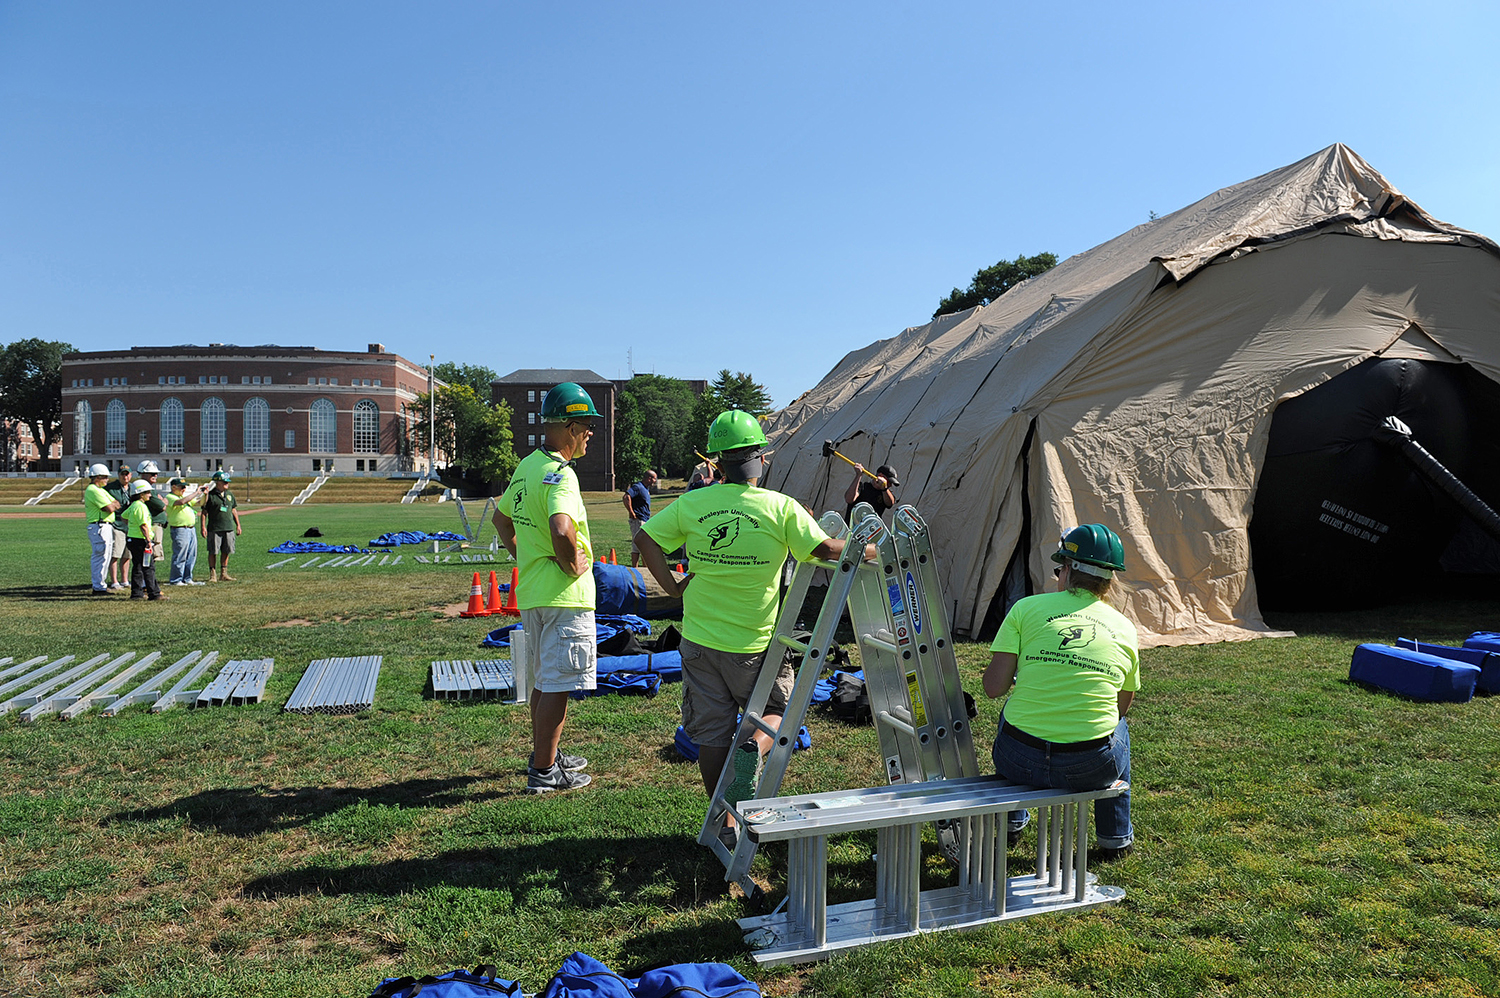 On Aug. 3, more than 20 Wesleyan employees helped erect a tent that could be used as a mobile hospital in the event of an emergency situation. Members of Wesleyan’s Campus Community Emergency Response Team (C-CERT) constructed the mobile unit with guidance from Middletown Emergency Management and Middletown Fire Department.